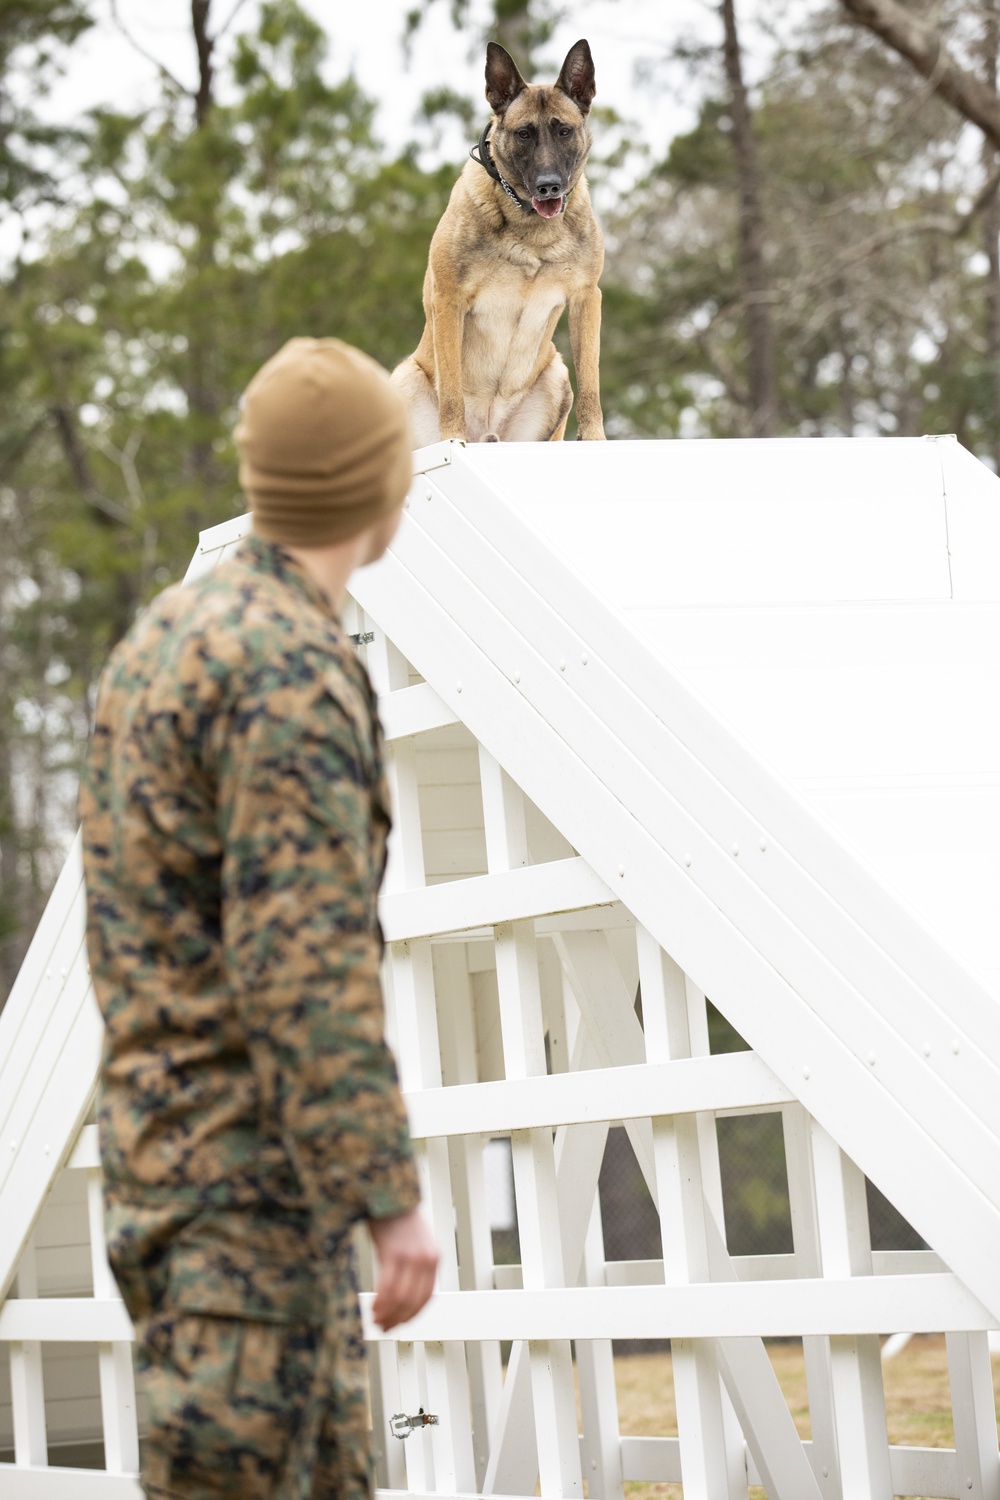 Paws on the ground: Military Working Dog handler experience